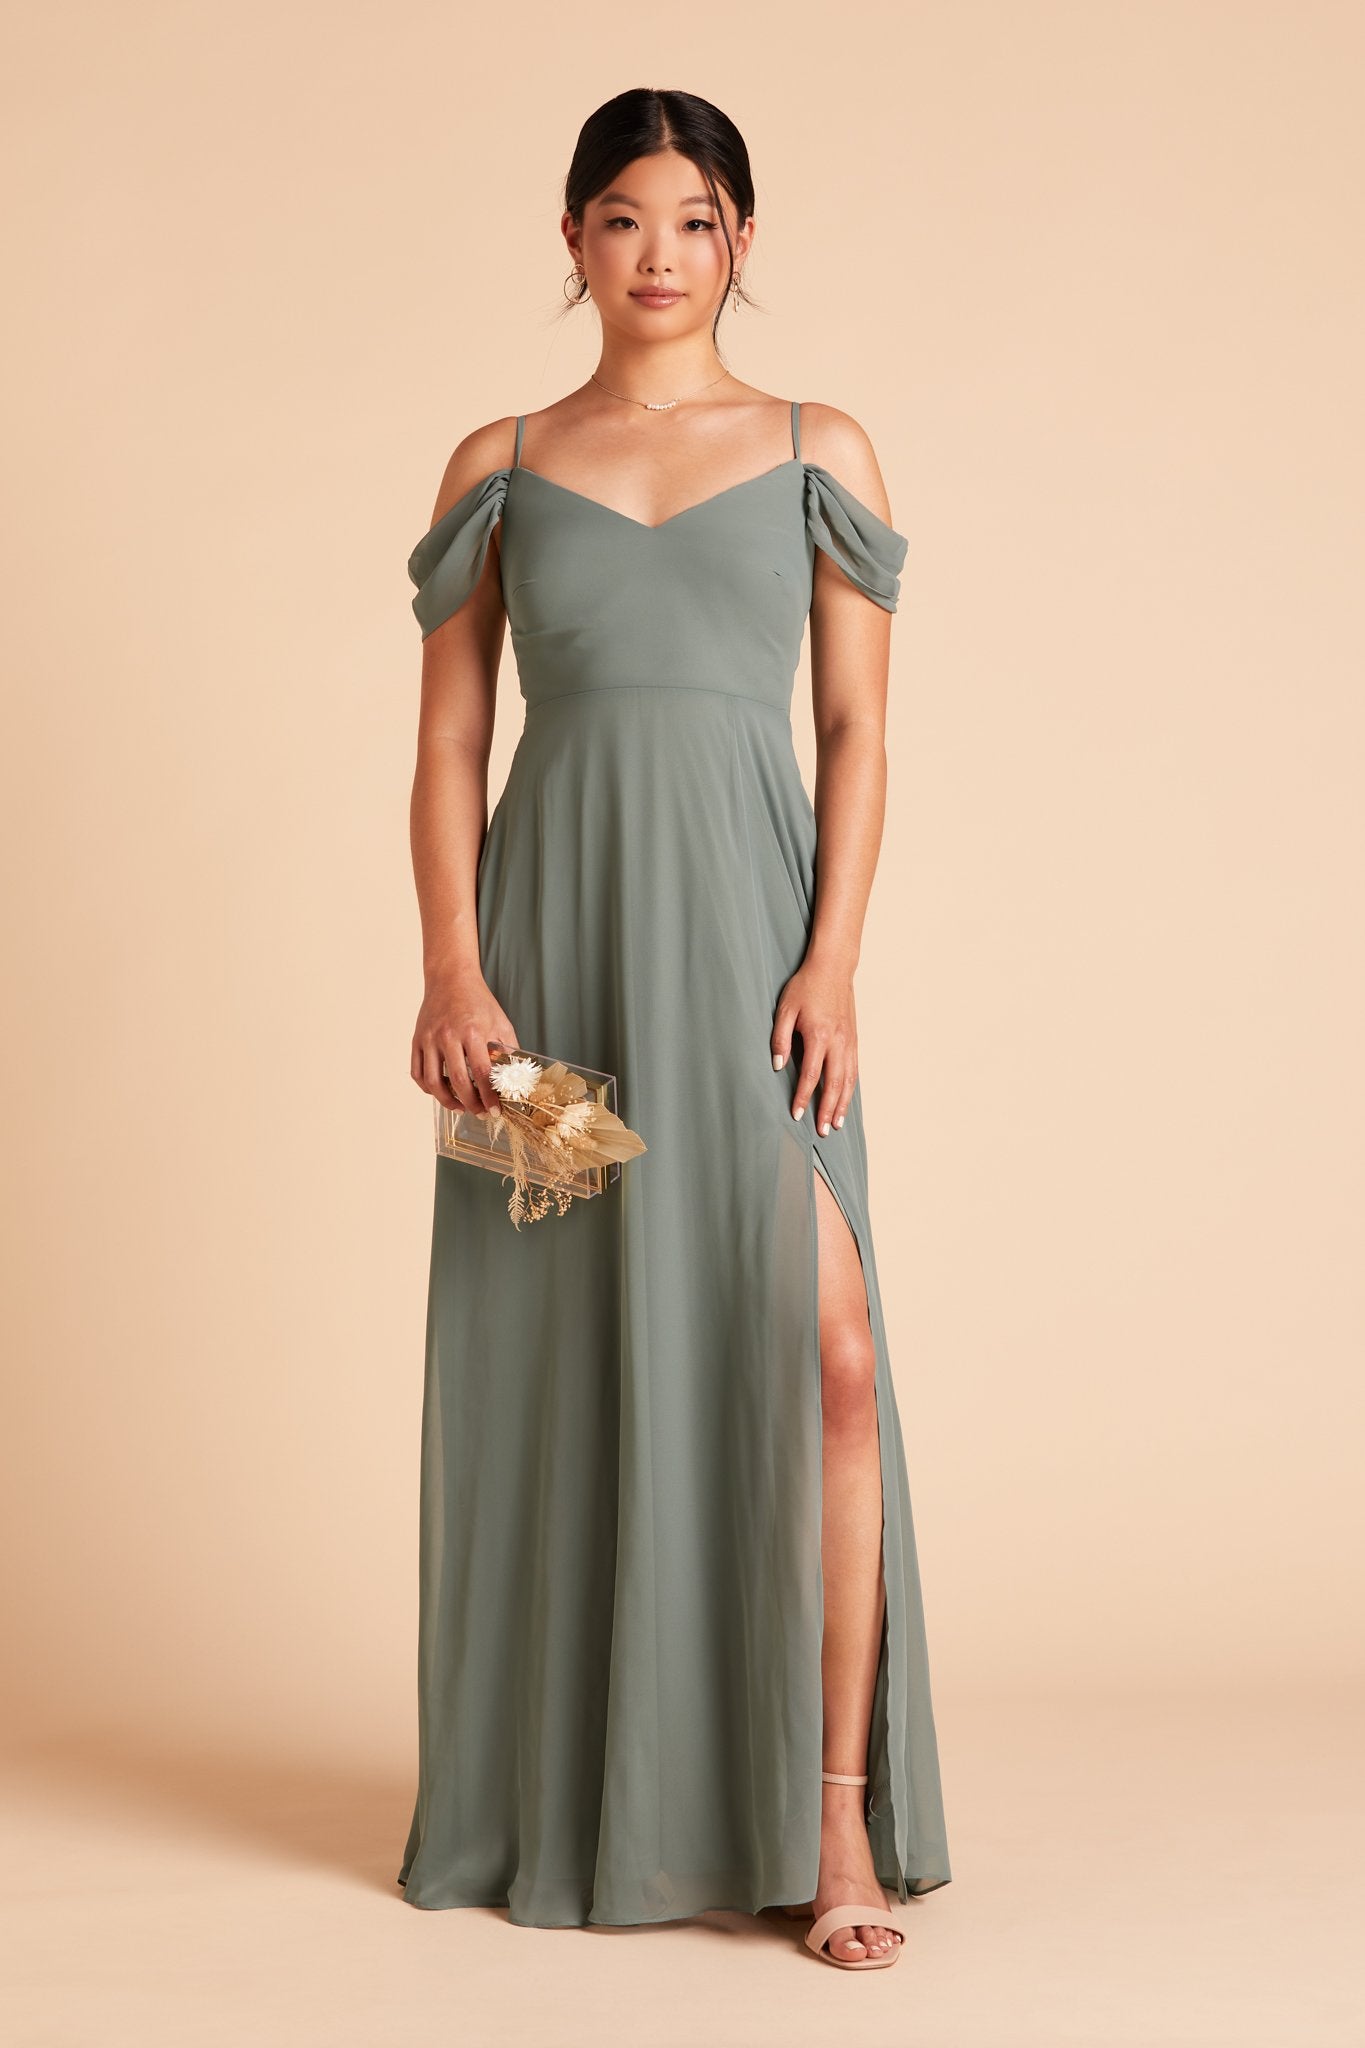 Devin convertible bridesmaids dress with slit in sea glass green chiffon by Birdy Grey, front view